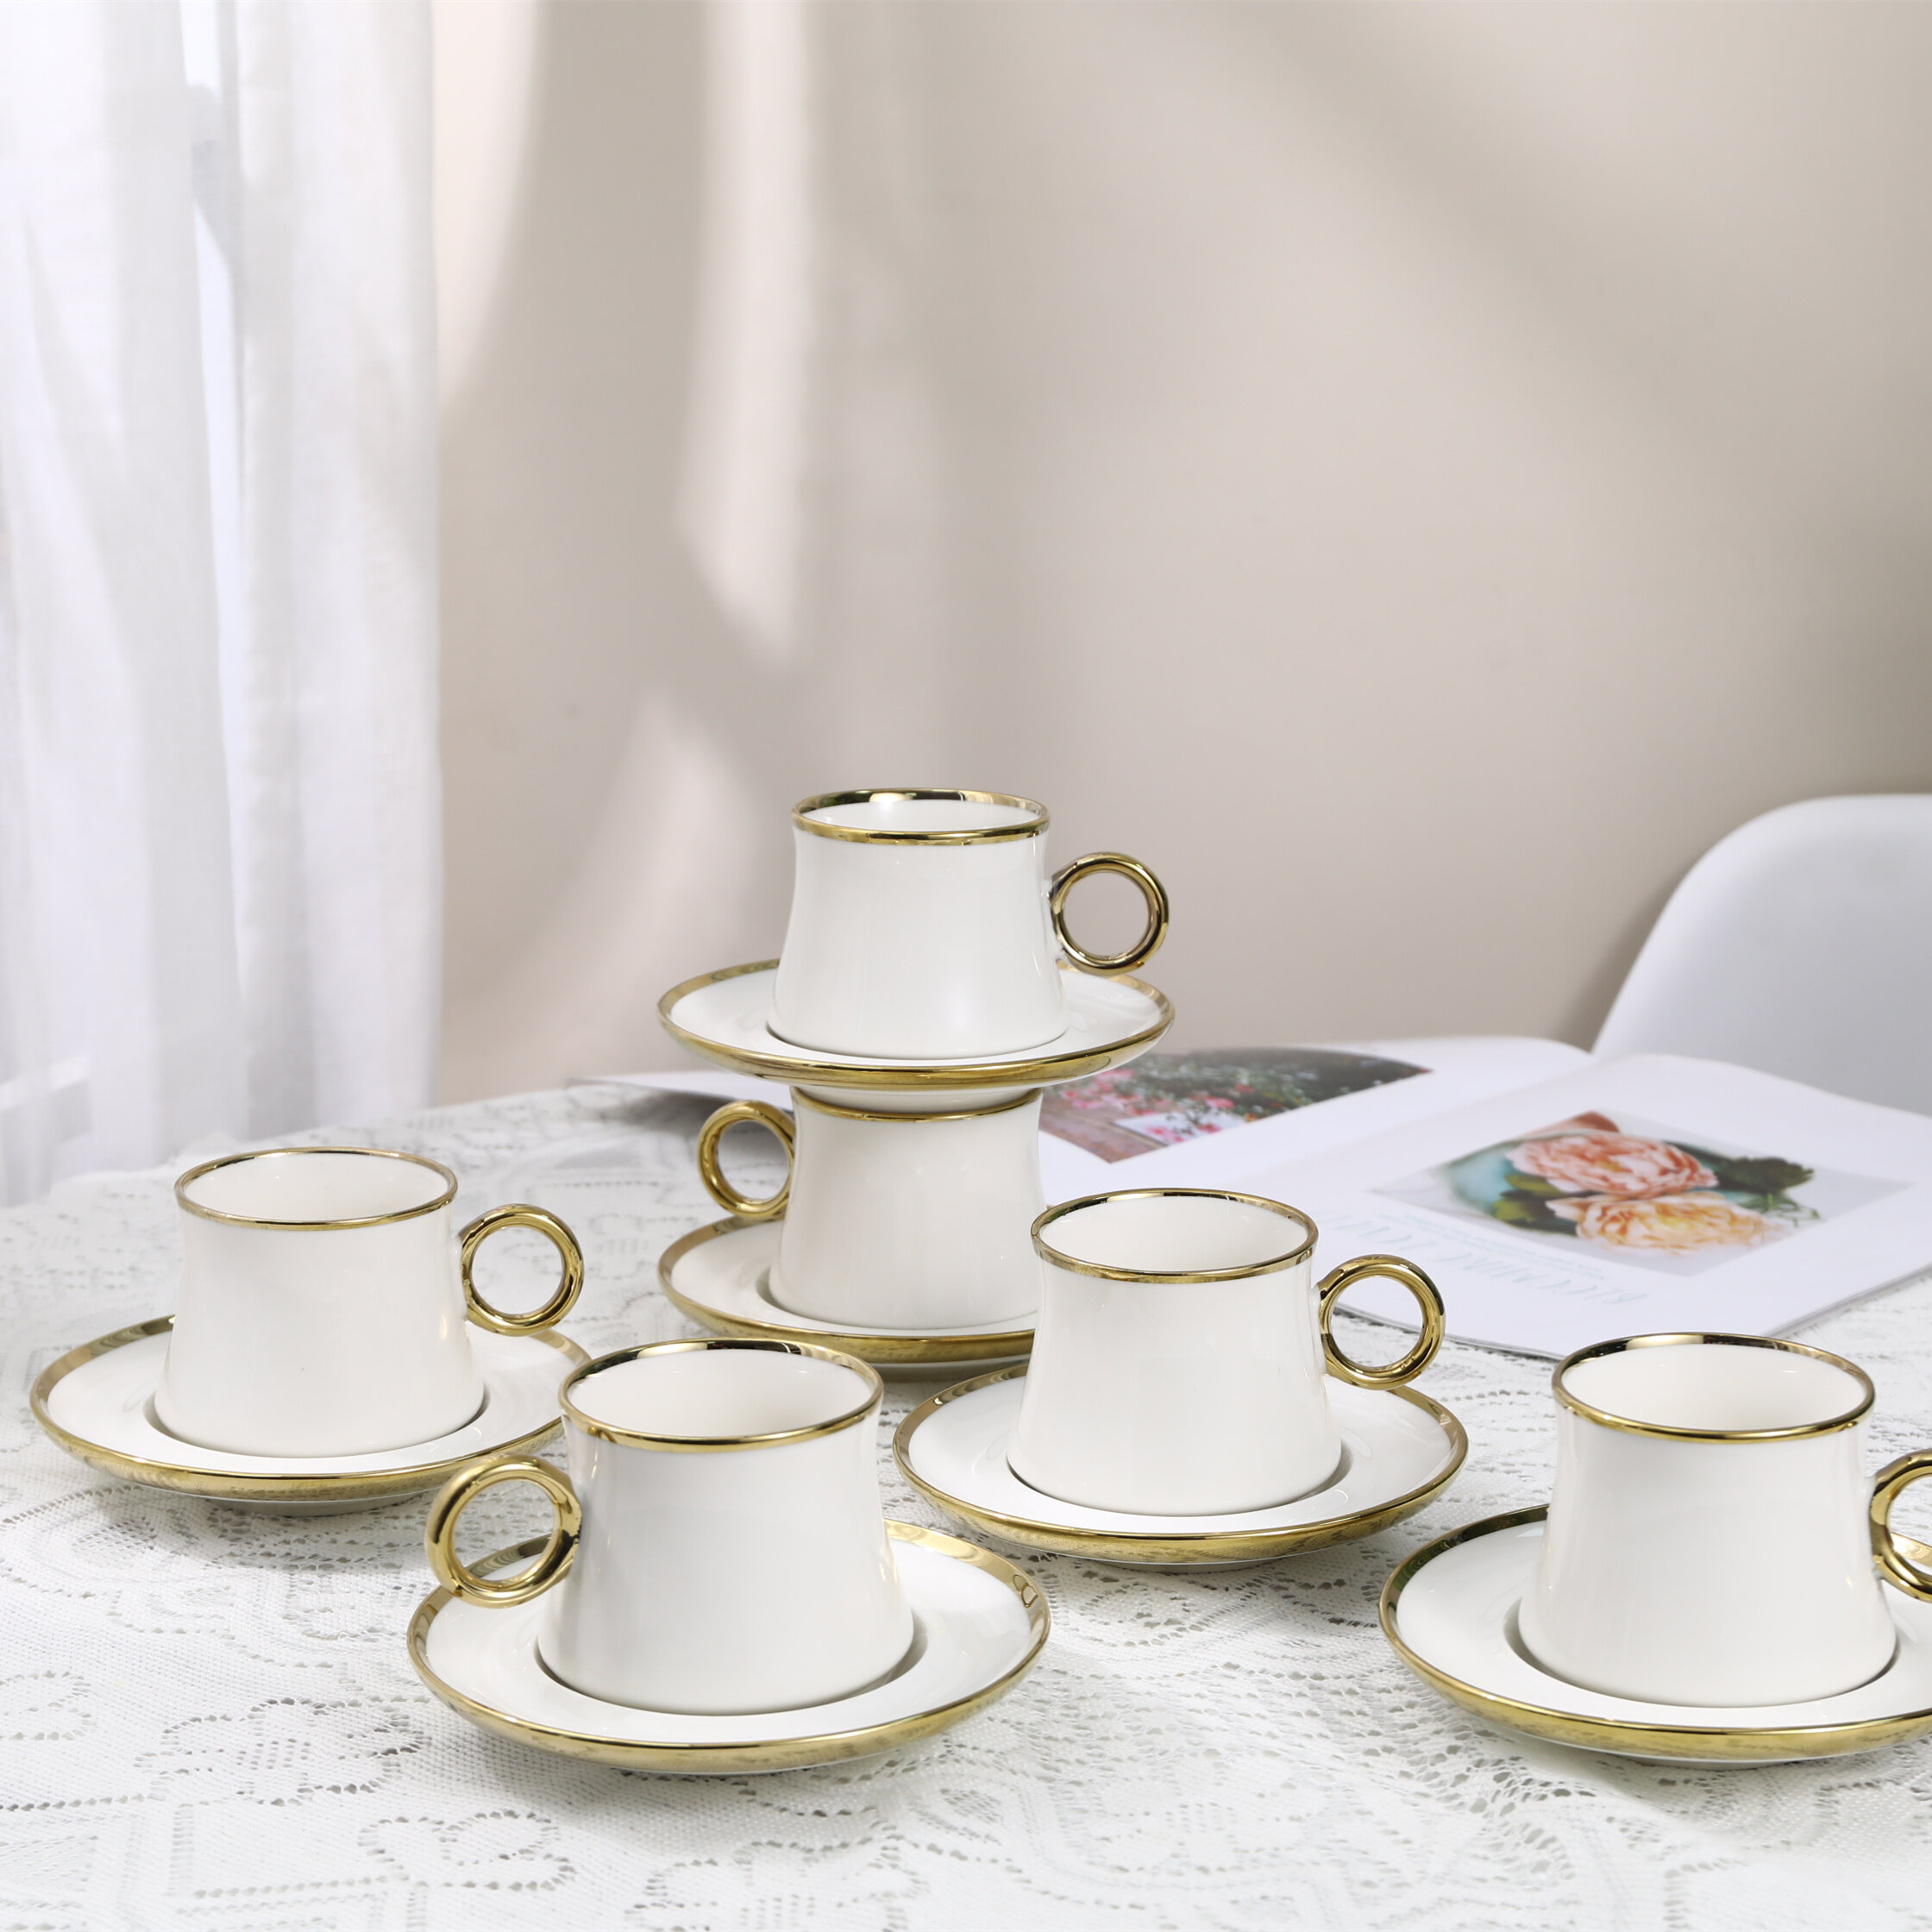 12 Pieces Gold-Rimmed White Cup And Saucer Tea Set For Gift Box Packing